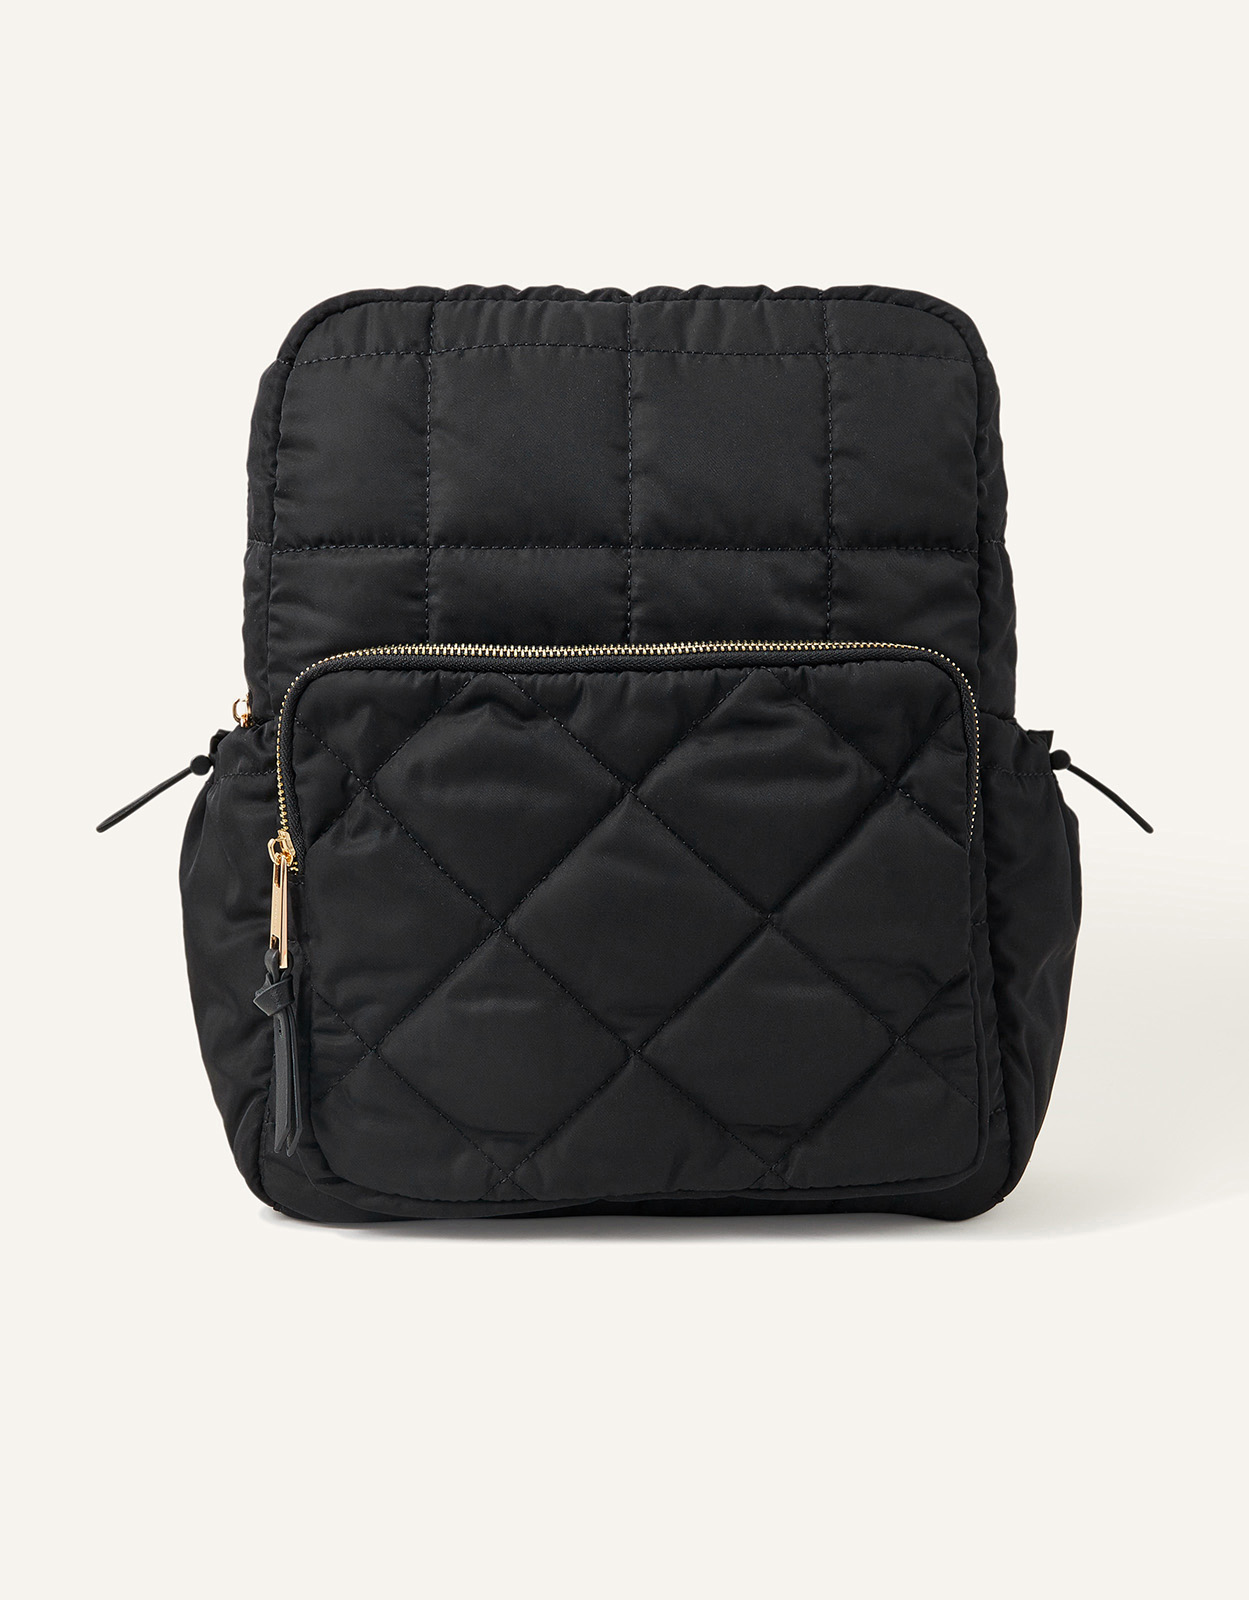 Accessorize Women's Black Quilted Nylon Laptop Backpack, Size: 36x28cm